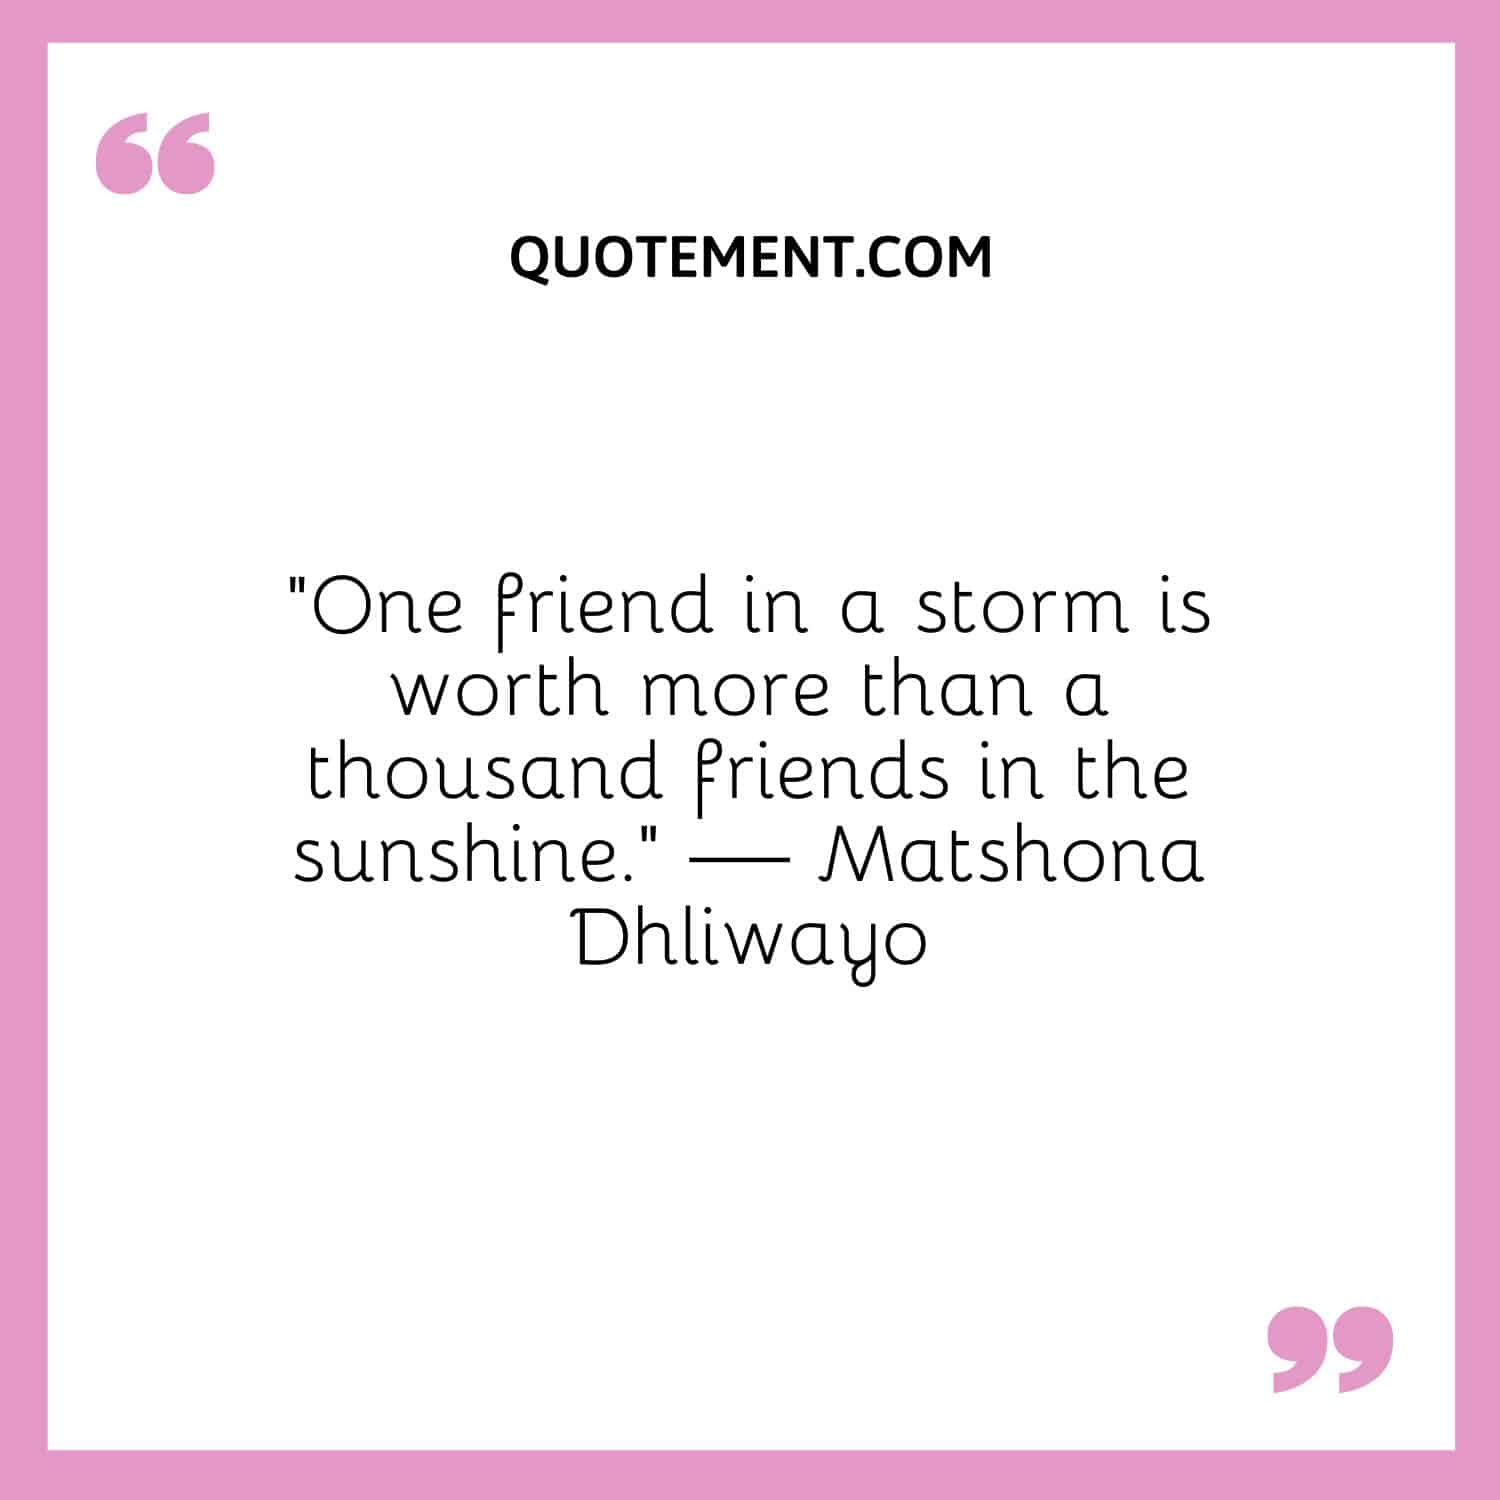 One friend in a storm is worth more than a thousand friends in the sunshine